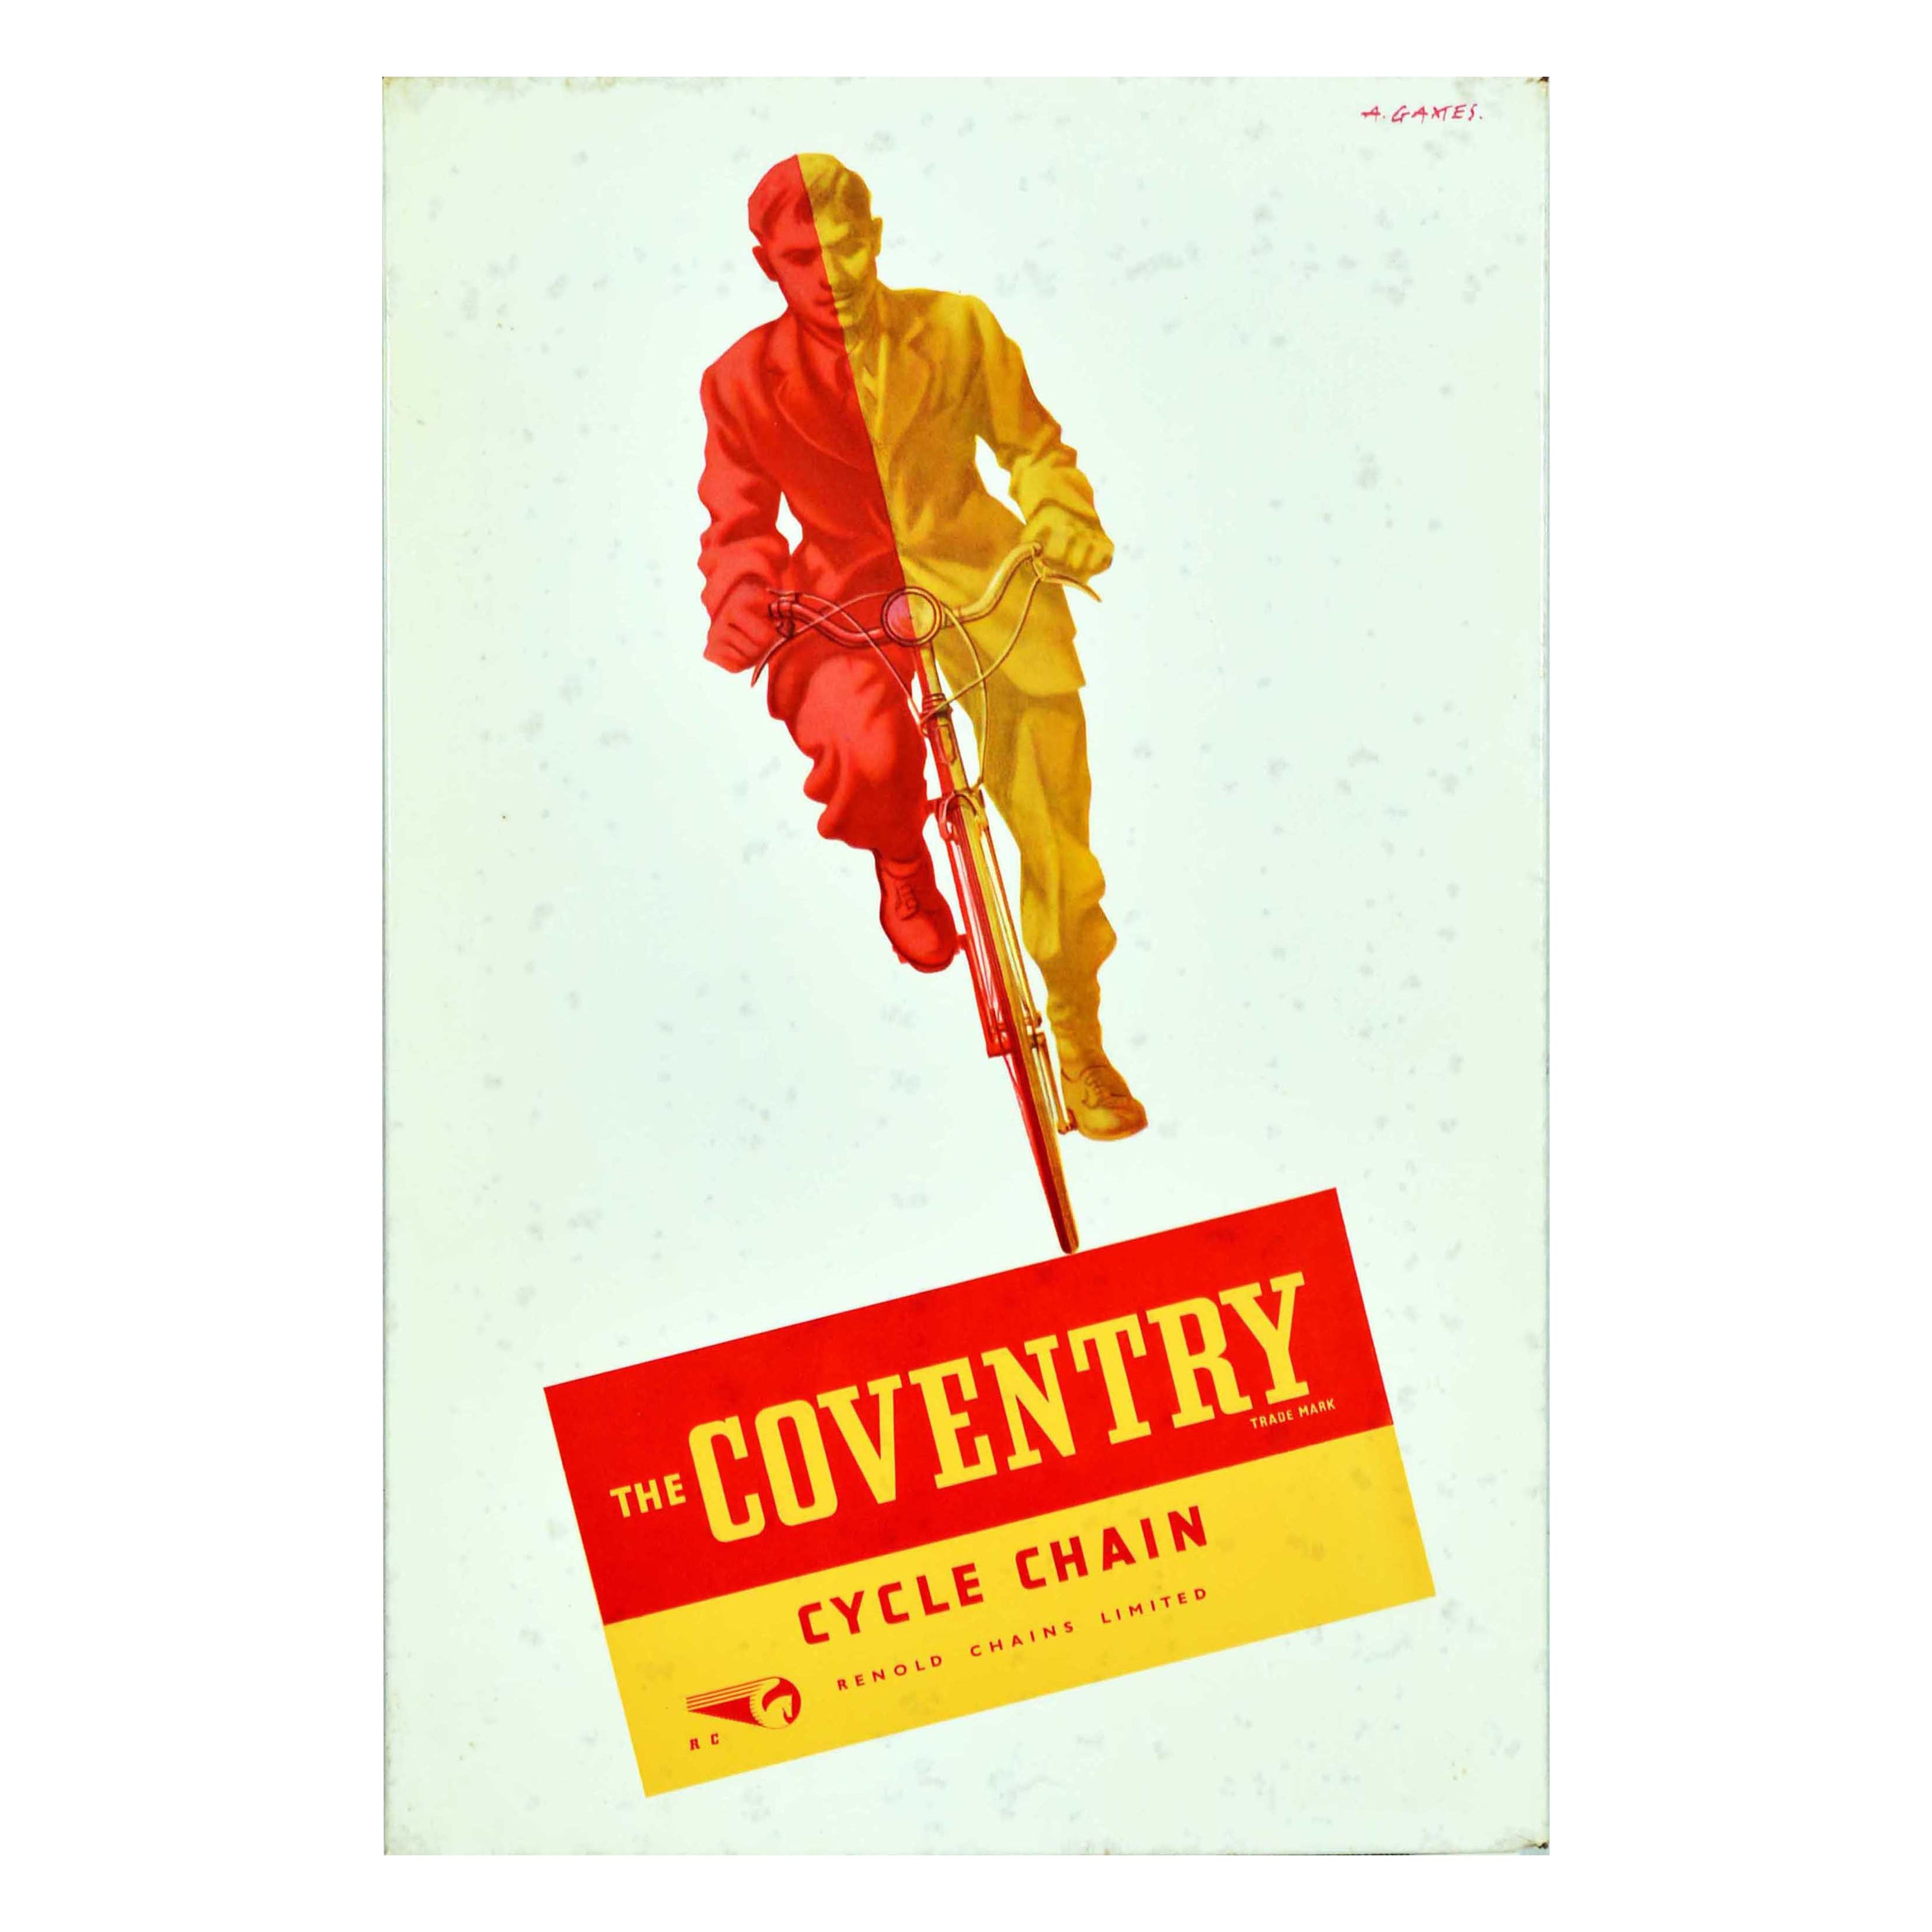 Original Vintage Poster Renold Coventry Cycle Chain Abram Games Cycling Standee For Sale